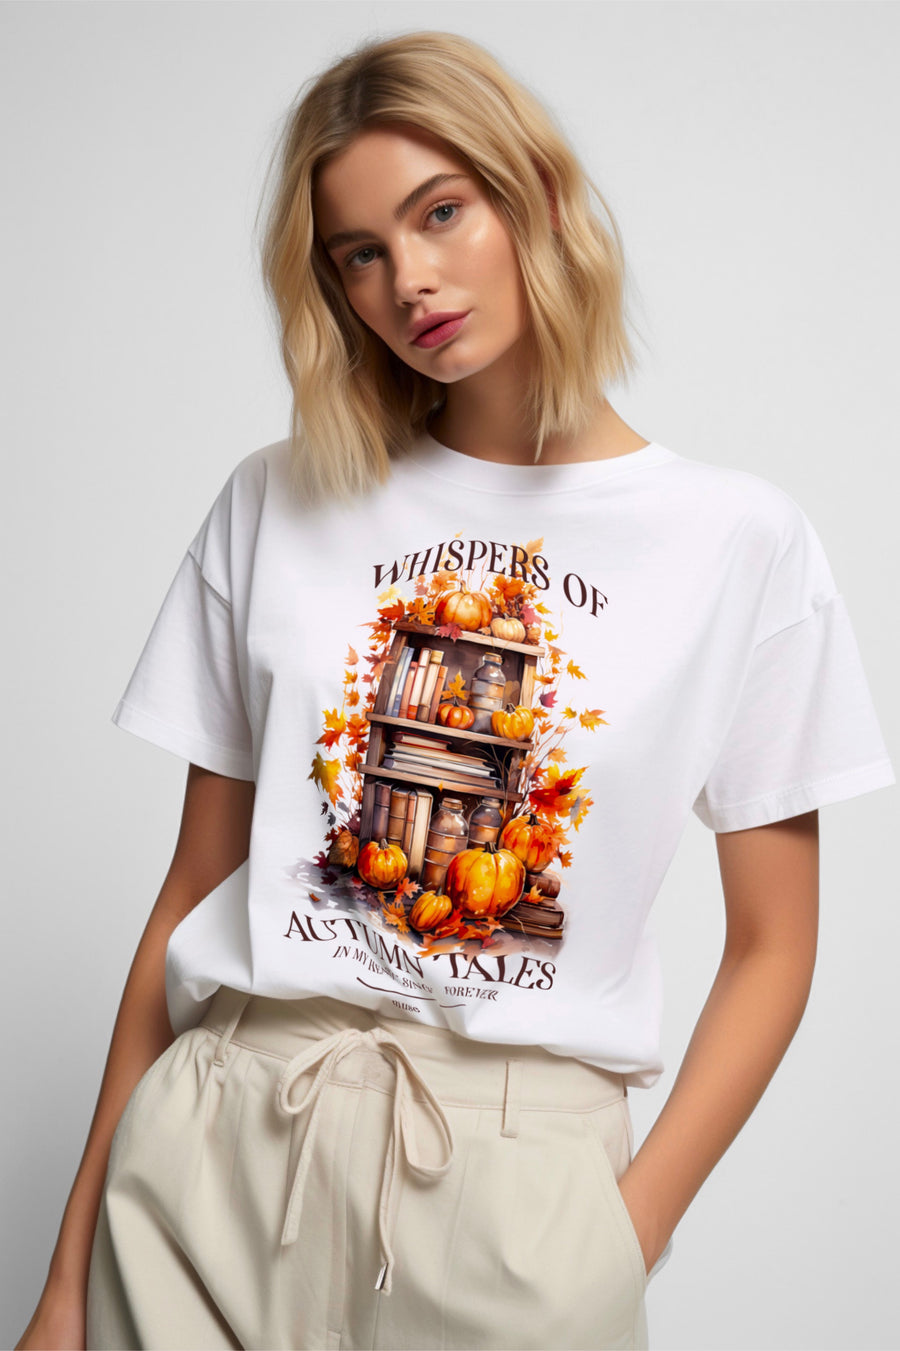 T-shirt | Whispers of autumn tales (in my heart since forever)